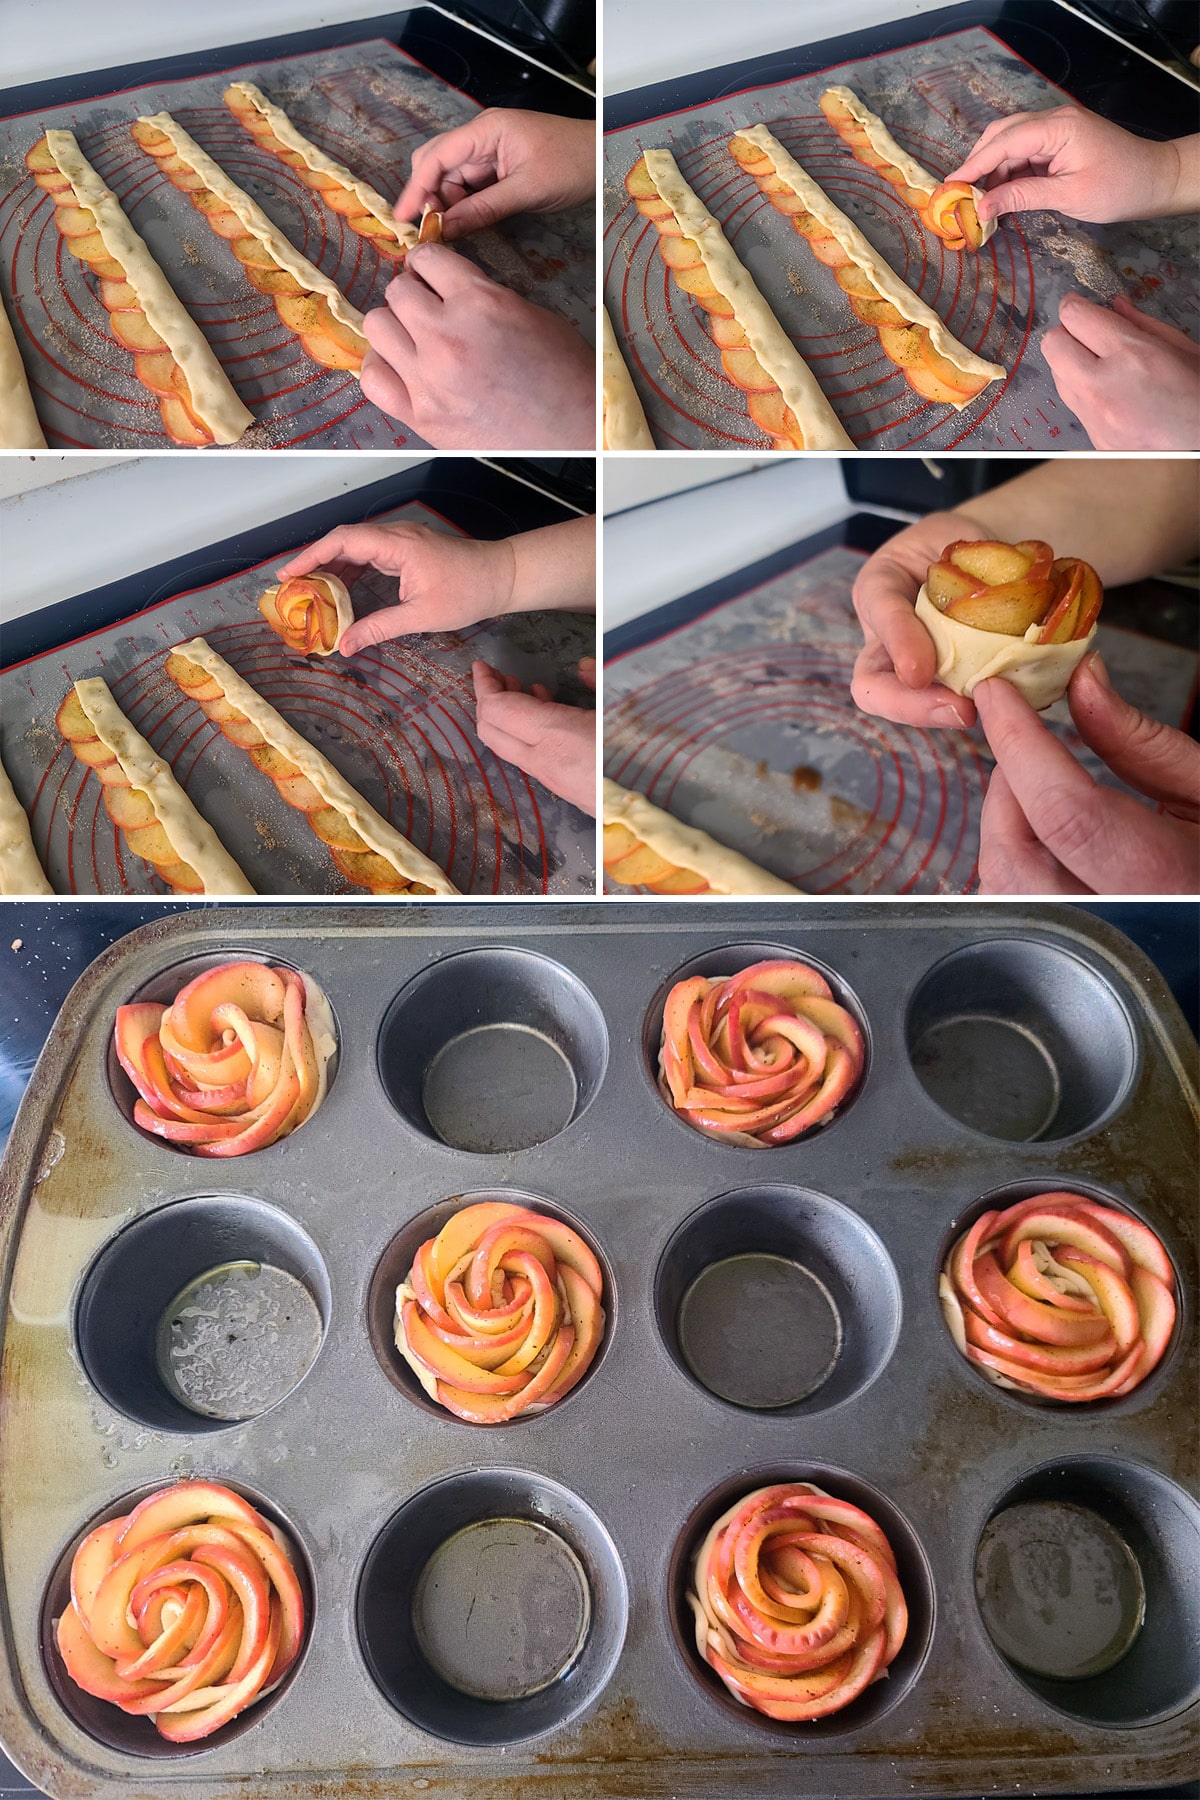 A 5 part image showing the apple pastry strips being rolled up into rose shapes and put into greased muffin tins.